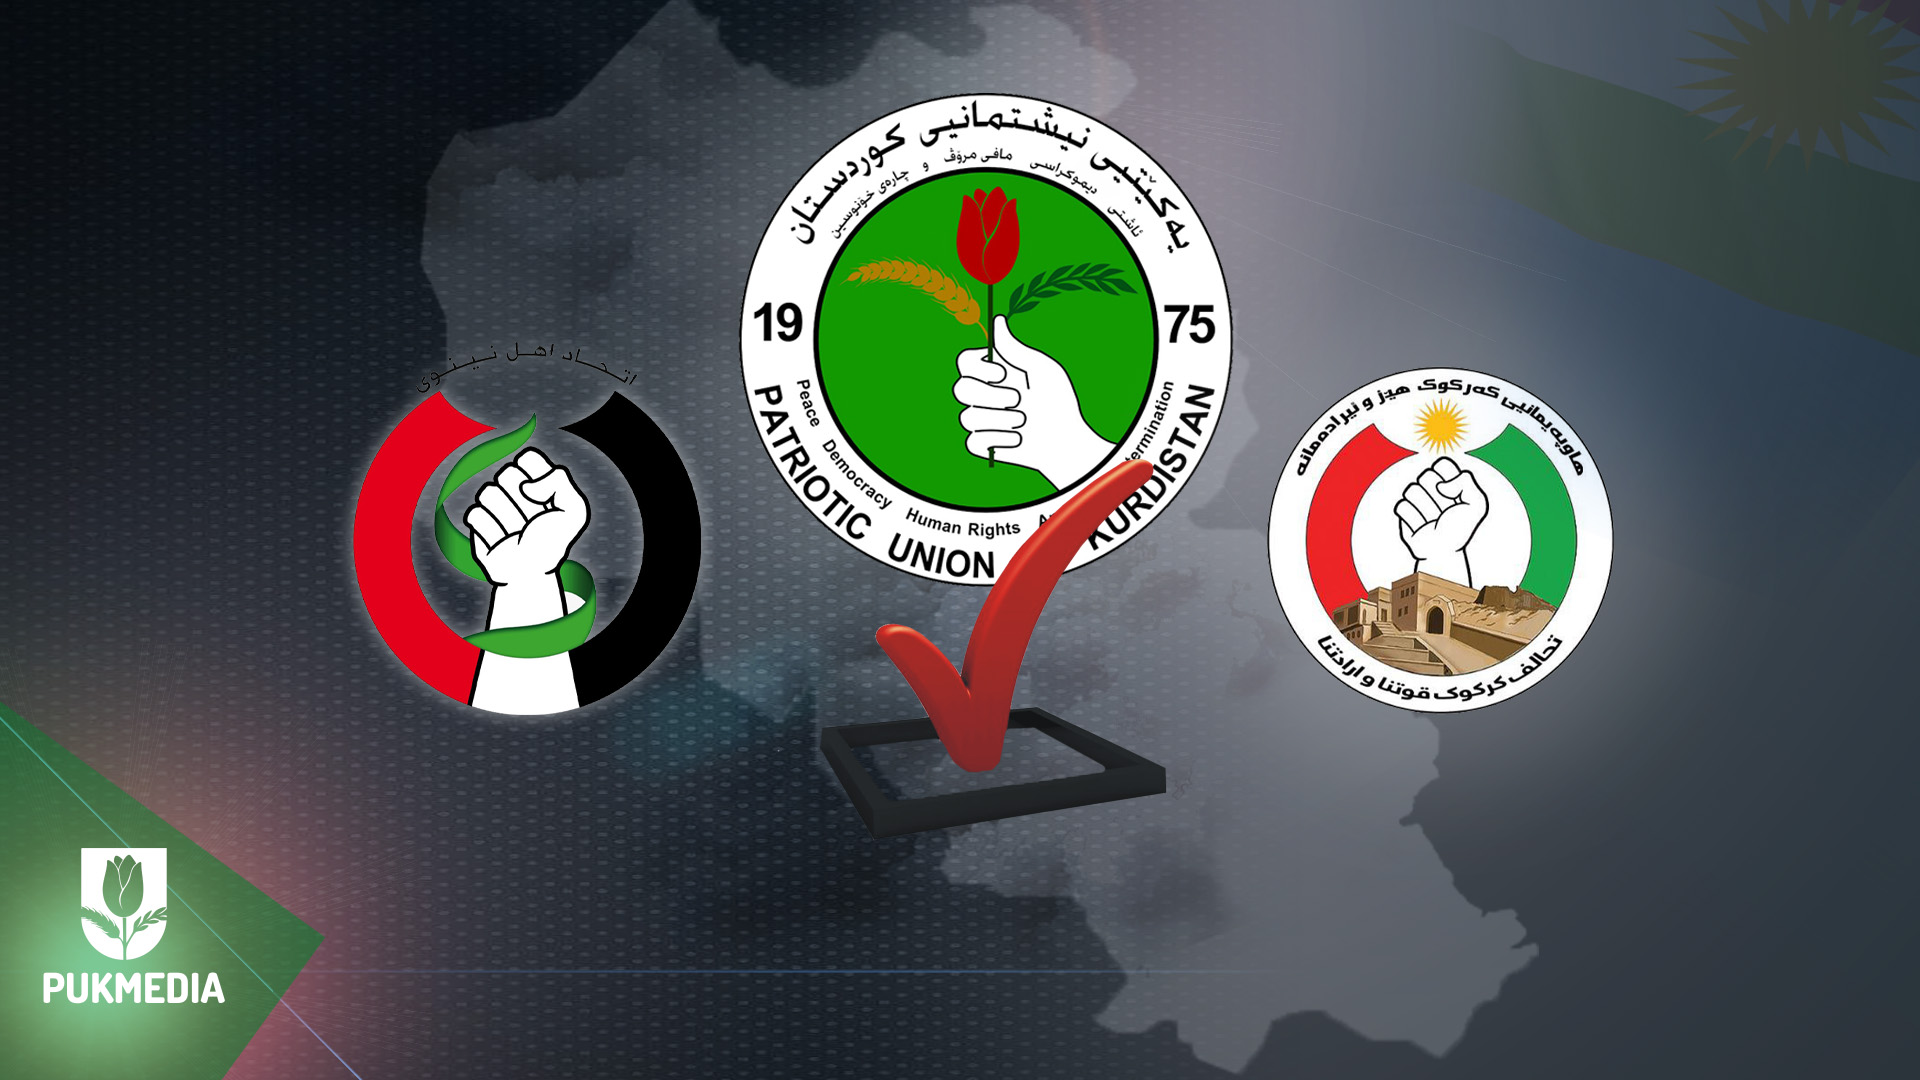 The logo of PUK's lists & coalitions